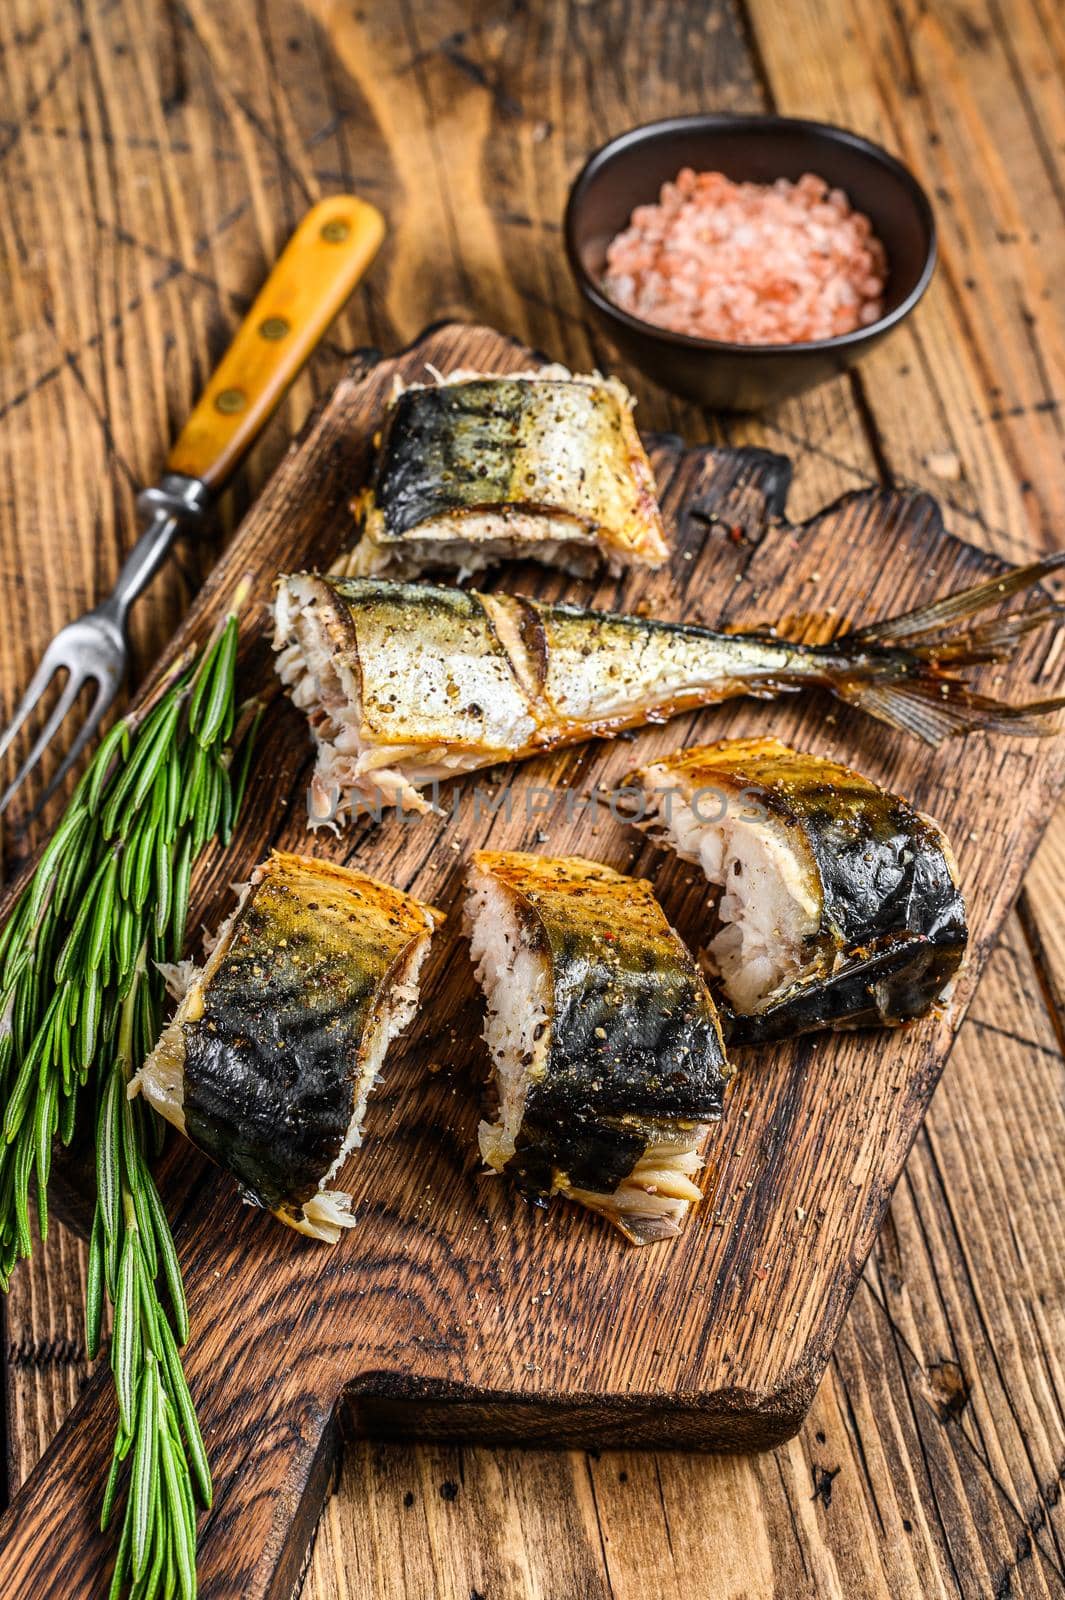 Grilled cut mackerel fish on cutting board. wooden background. Top view by Composter